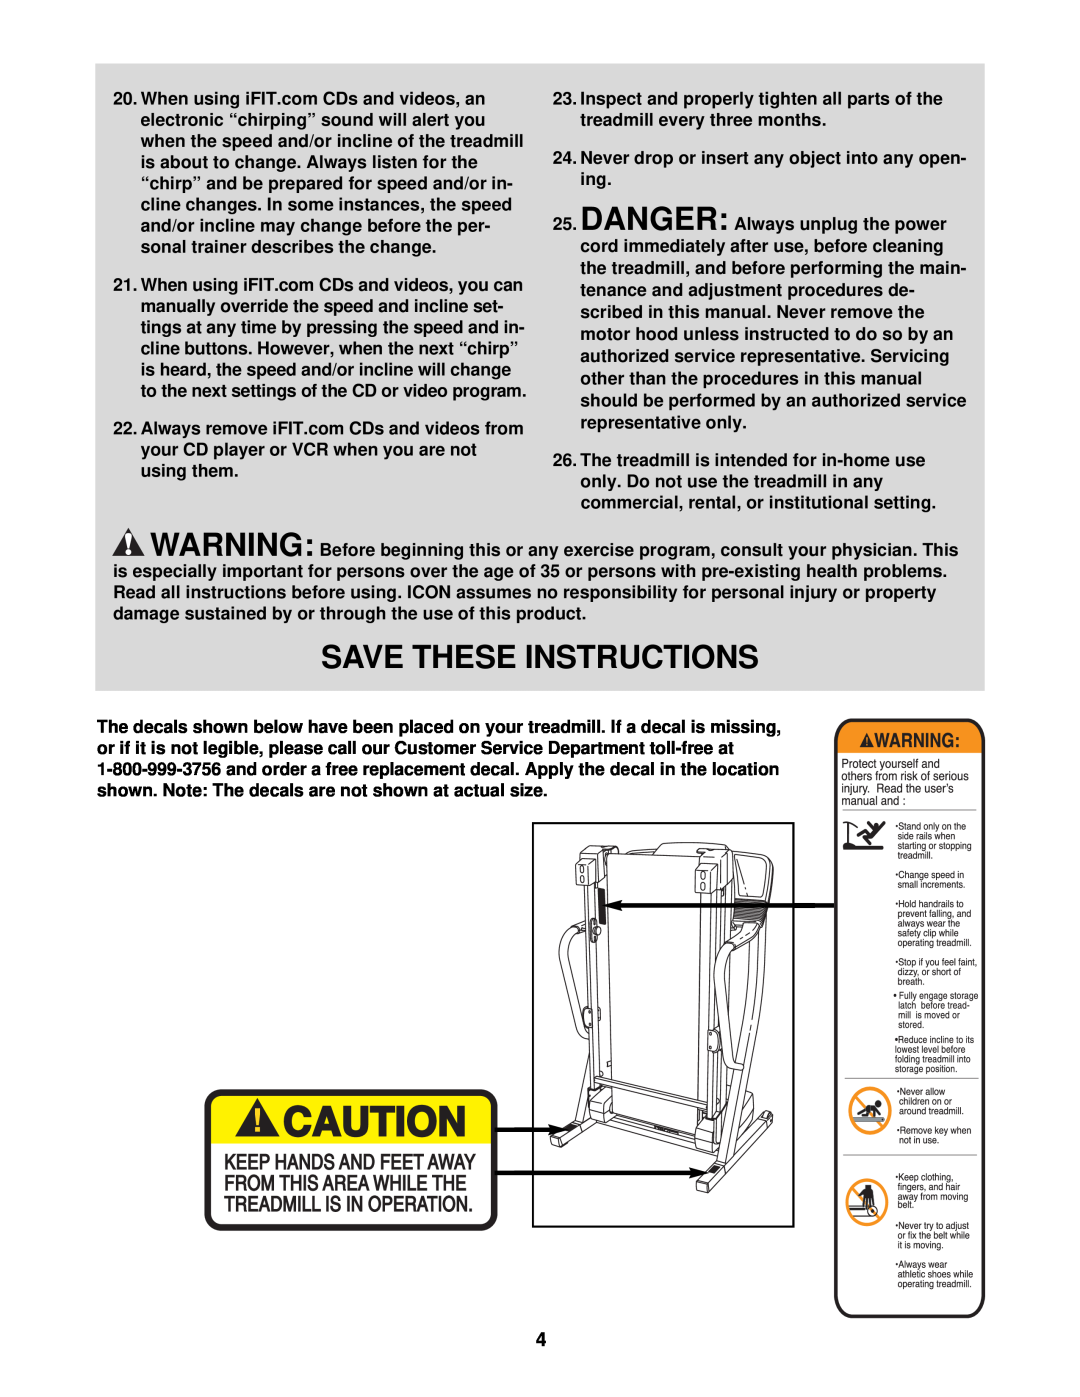 ProForm DTL72940 user manual Save These Instructions, Never drop or insert any object into any open- ing 